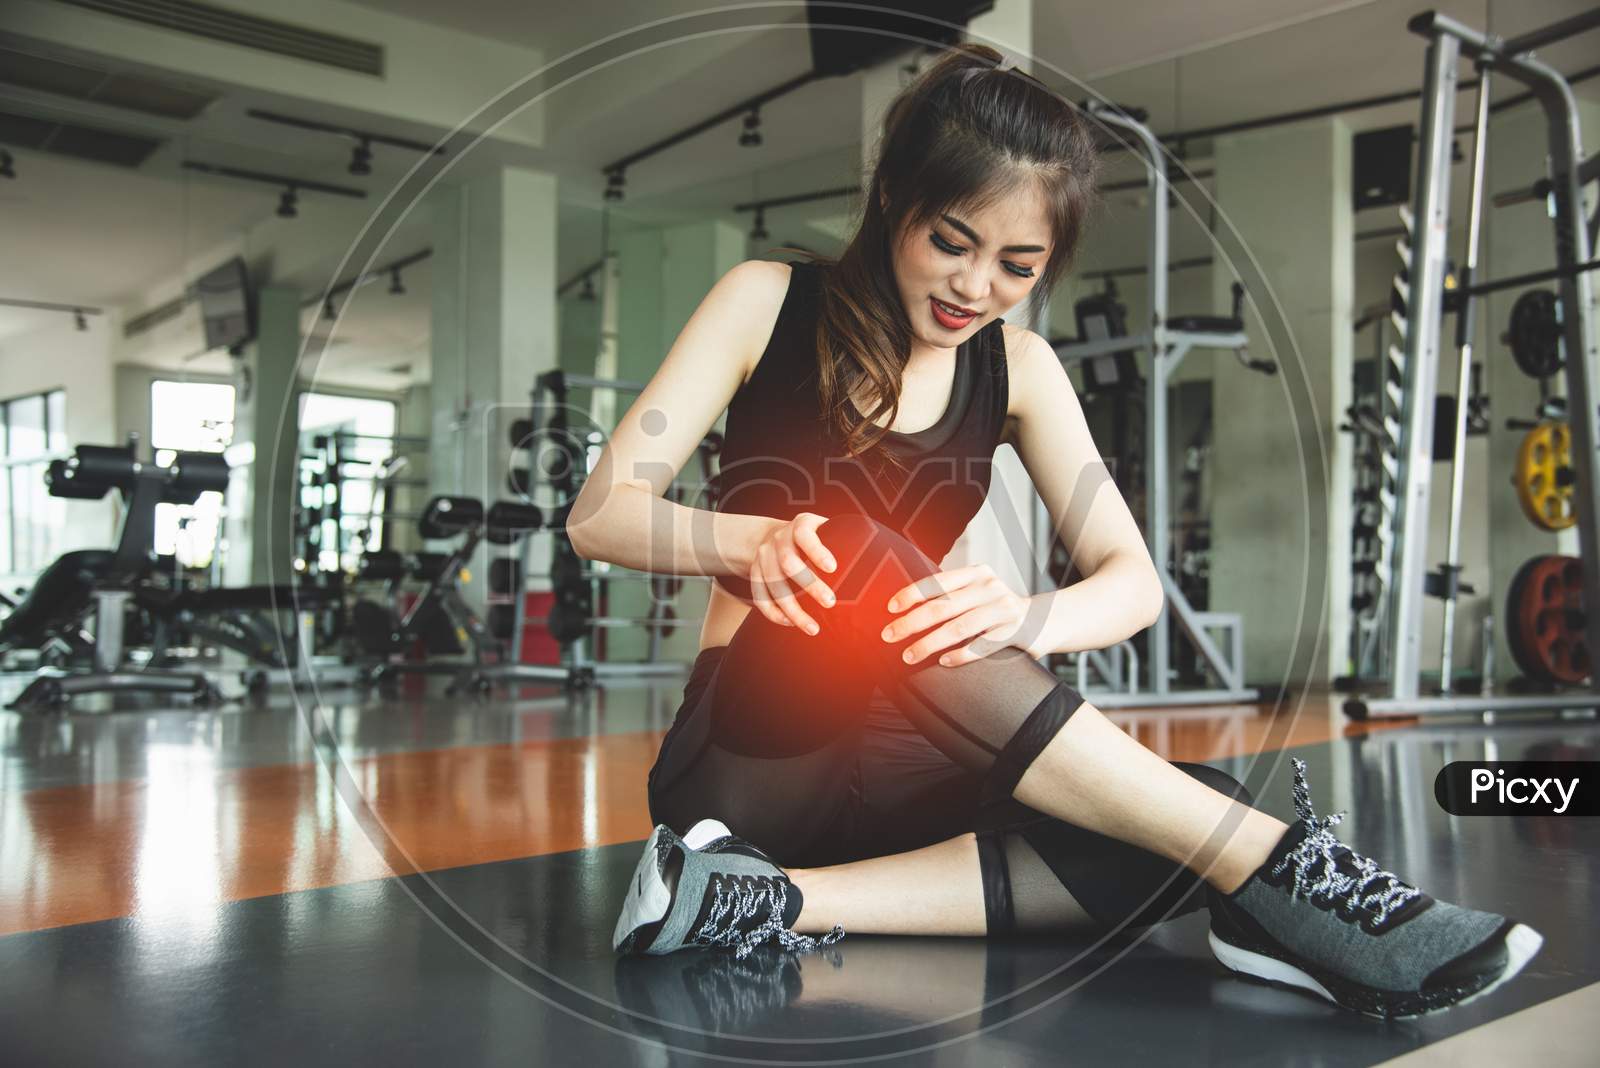 Asian Woman Injuries During Workout At Knee In Fitness Gym Sport Center. Medical And Healthcare Concept. Exercise And Training Theme. People Healthy Lifestyle And Leisure Activity Problem